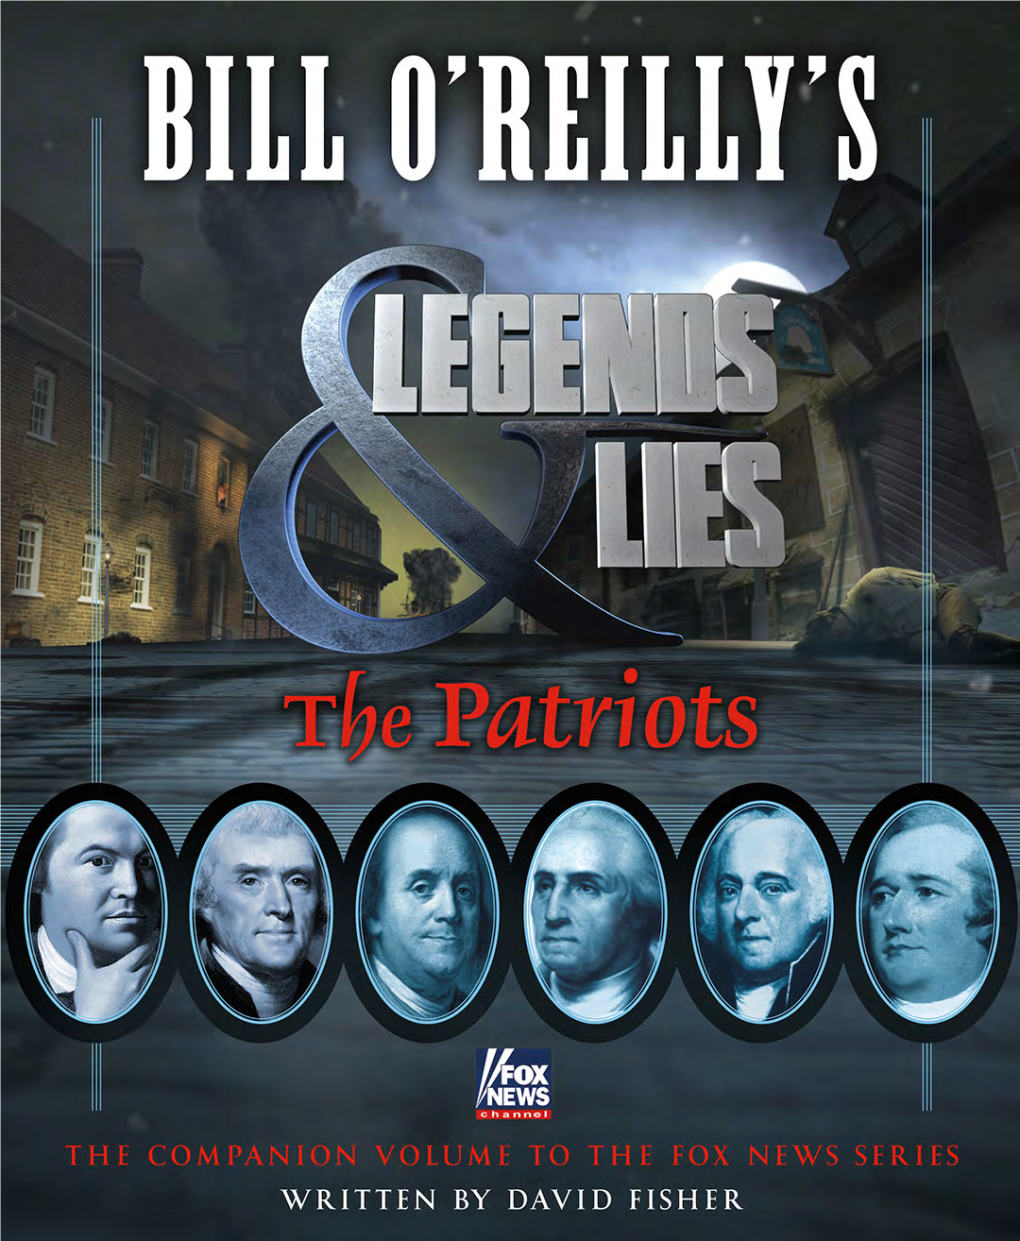 Legends-And-Lies-The-Patriots-By-Bill